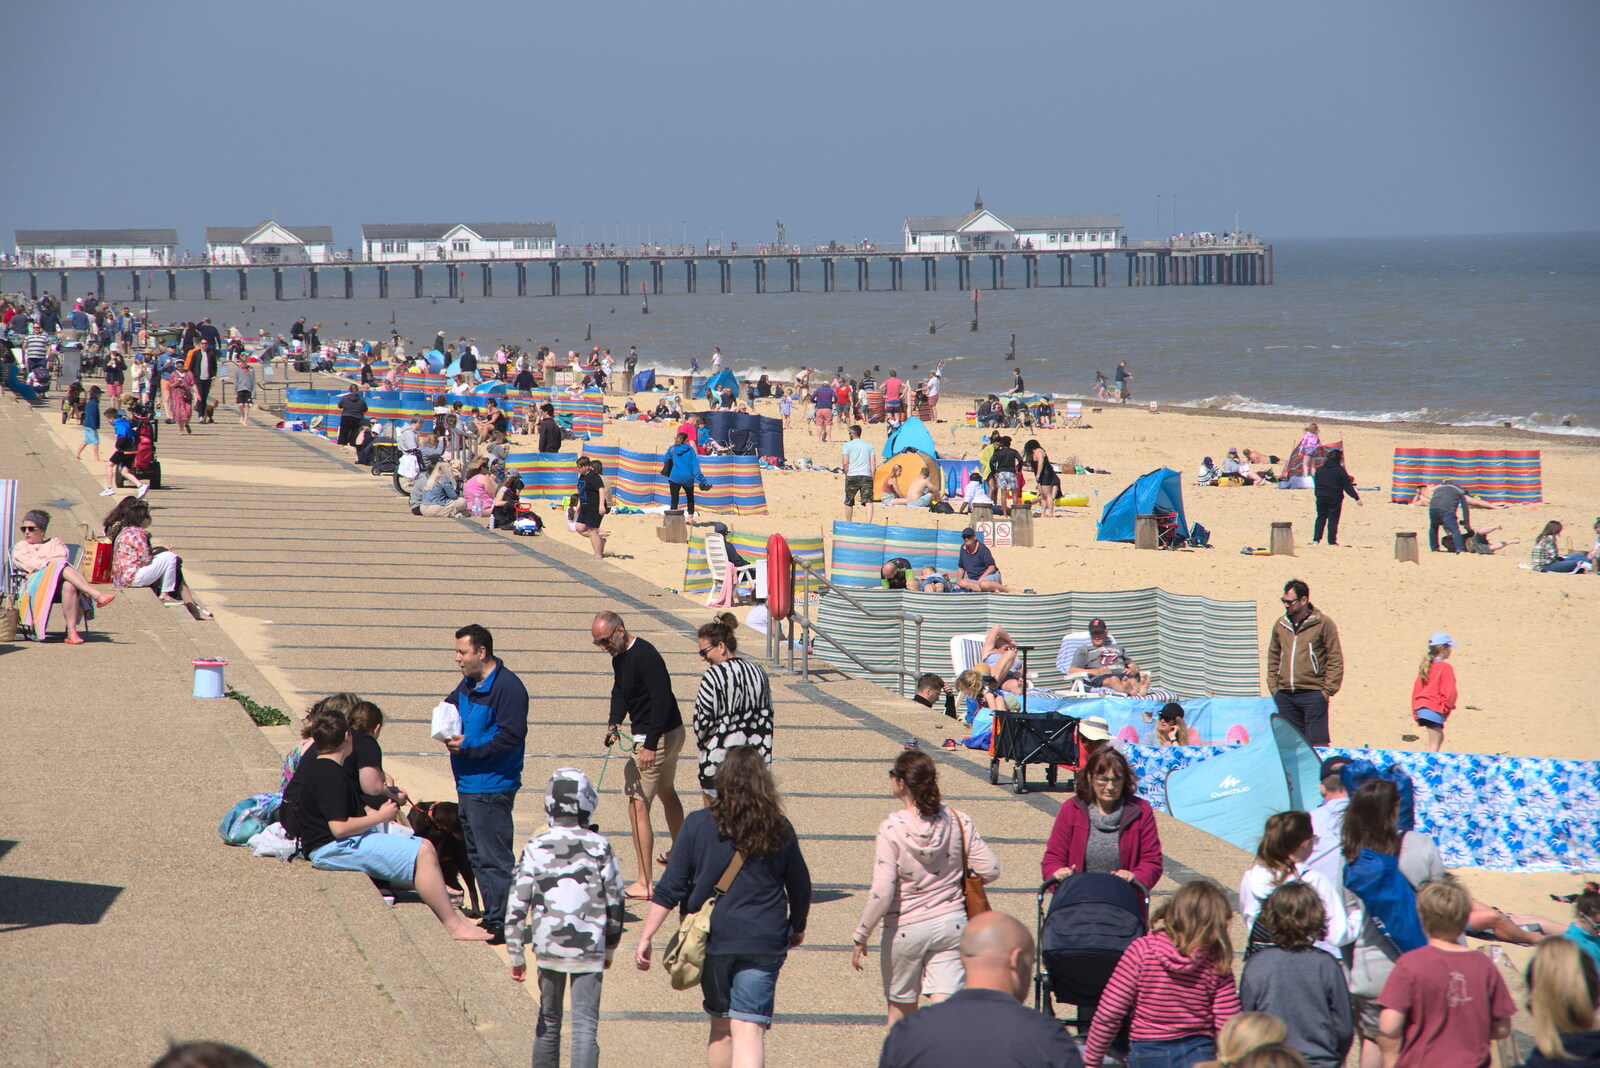 Southwold beach is packed from A Day at the Beach with Sis, Southwold, Suffolk - 31st May 2021